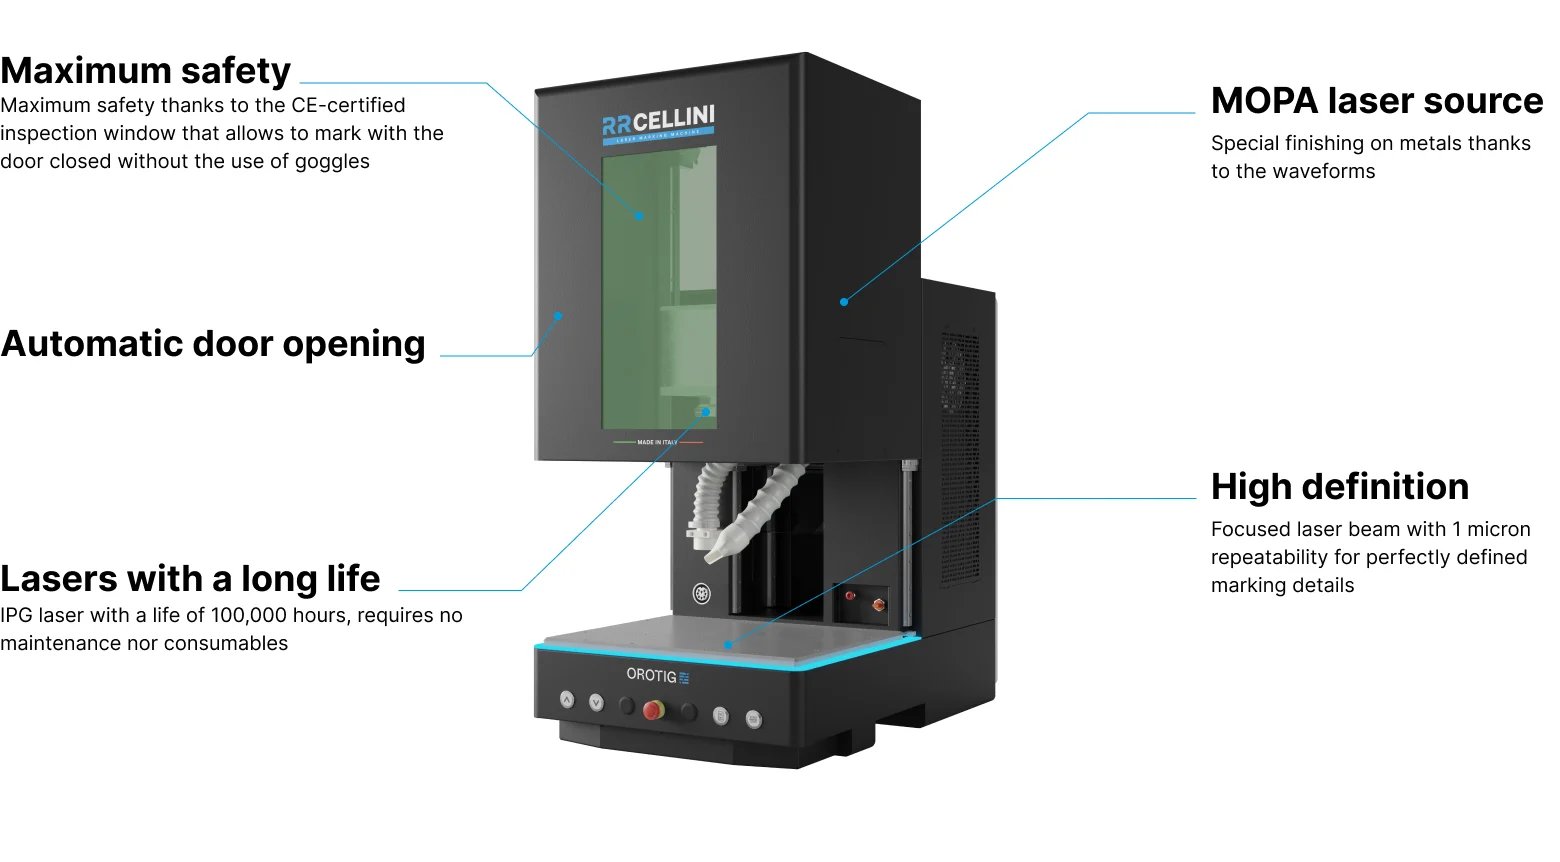 Technical features of Orotig's RR Cellini 3D marking laser.